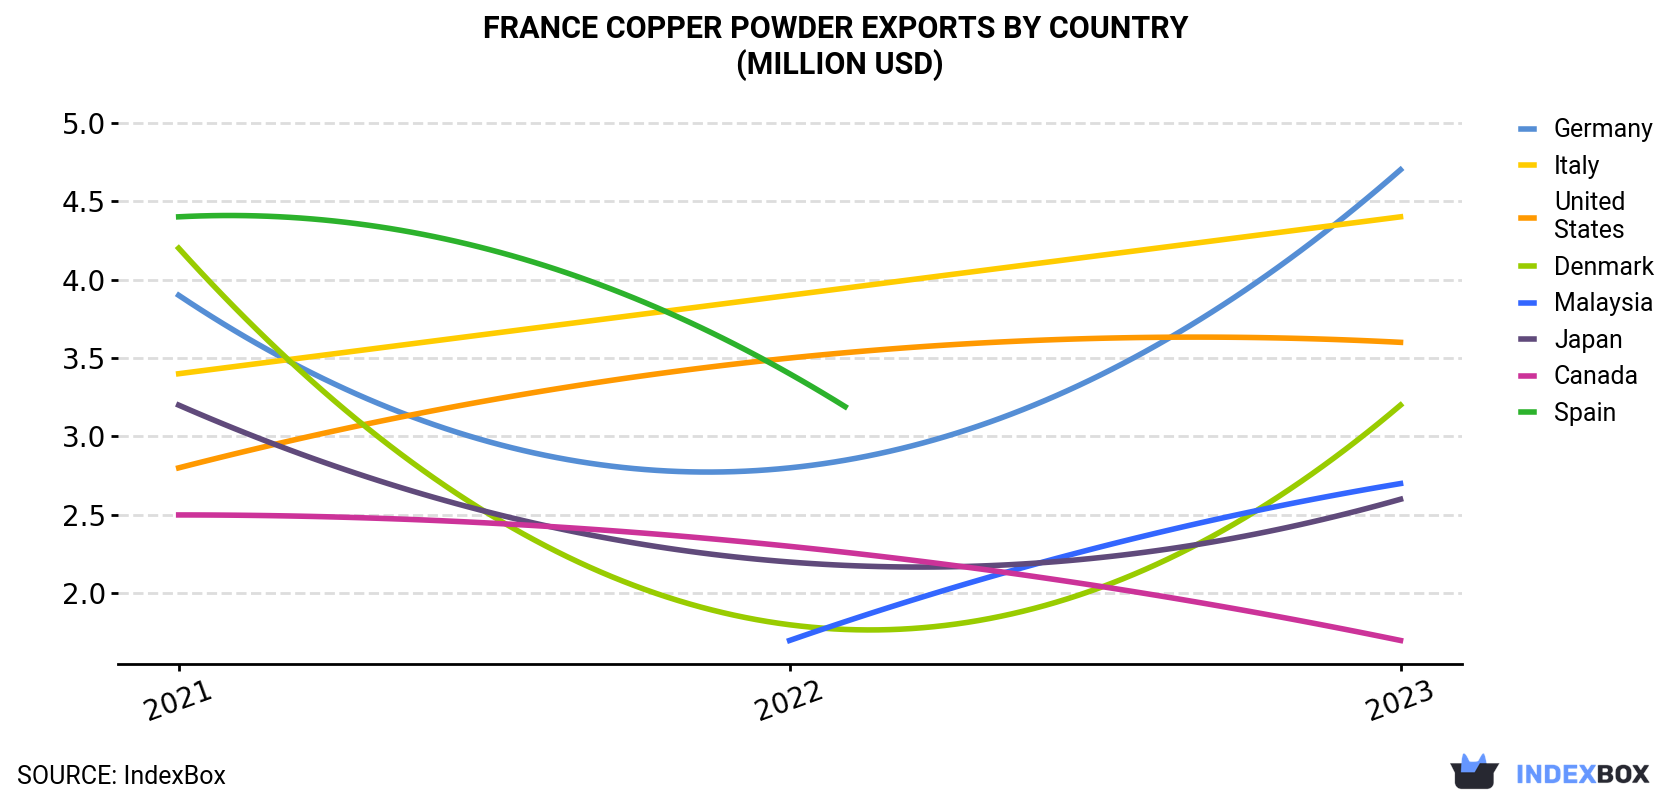 France Copper Powder Exports By Country (Million USD)